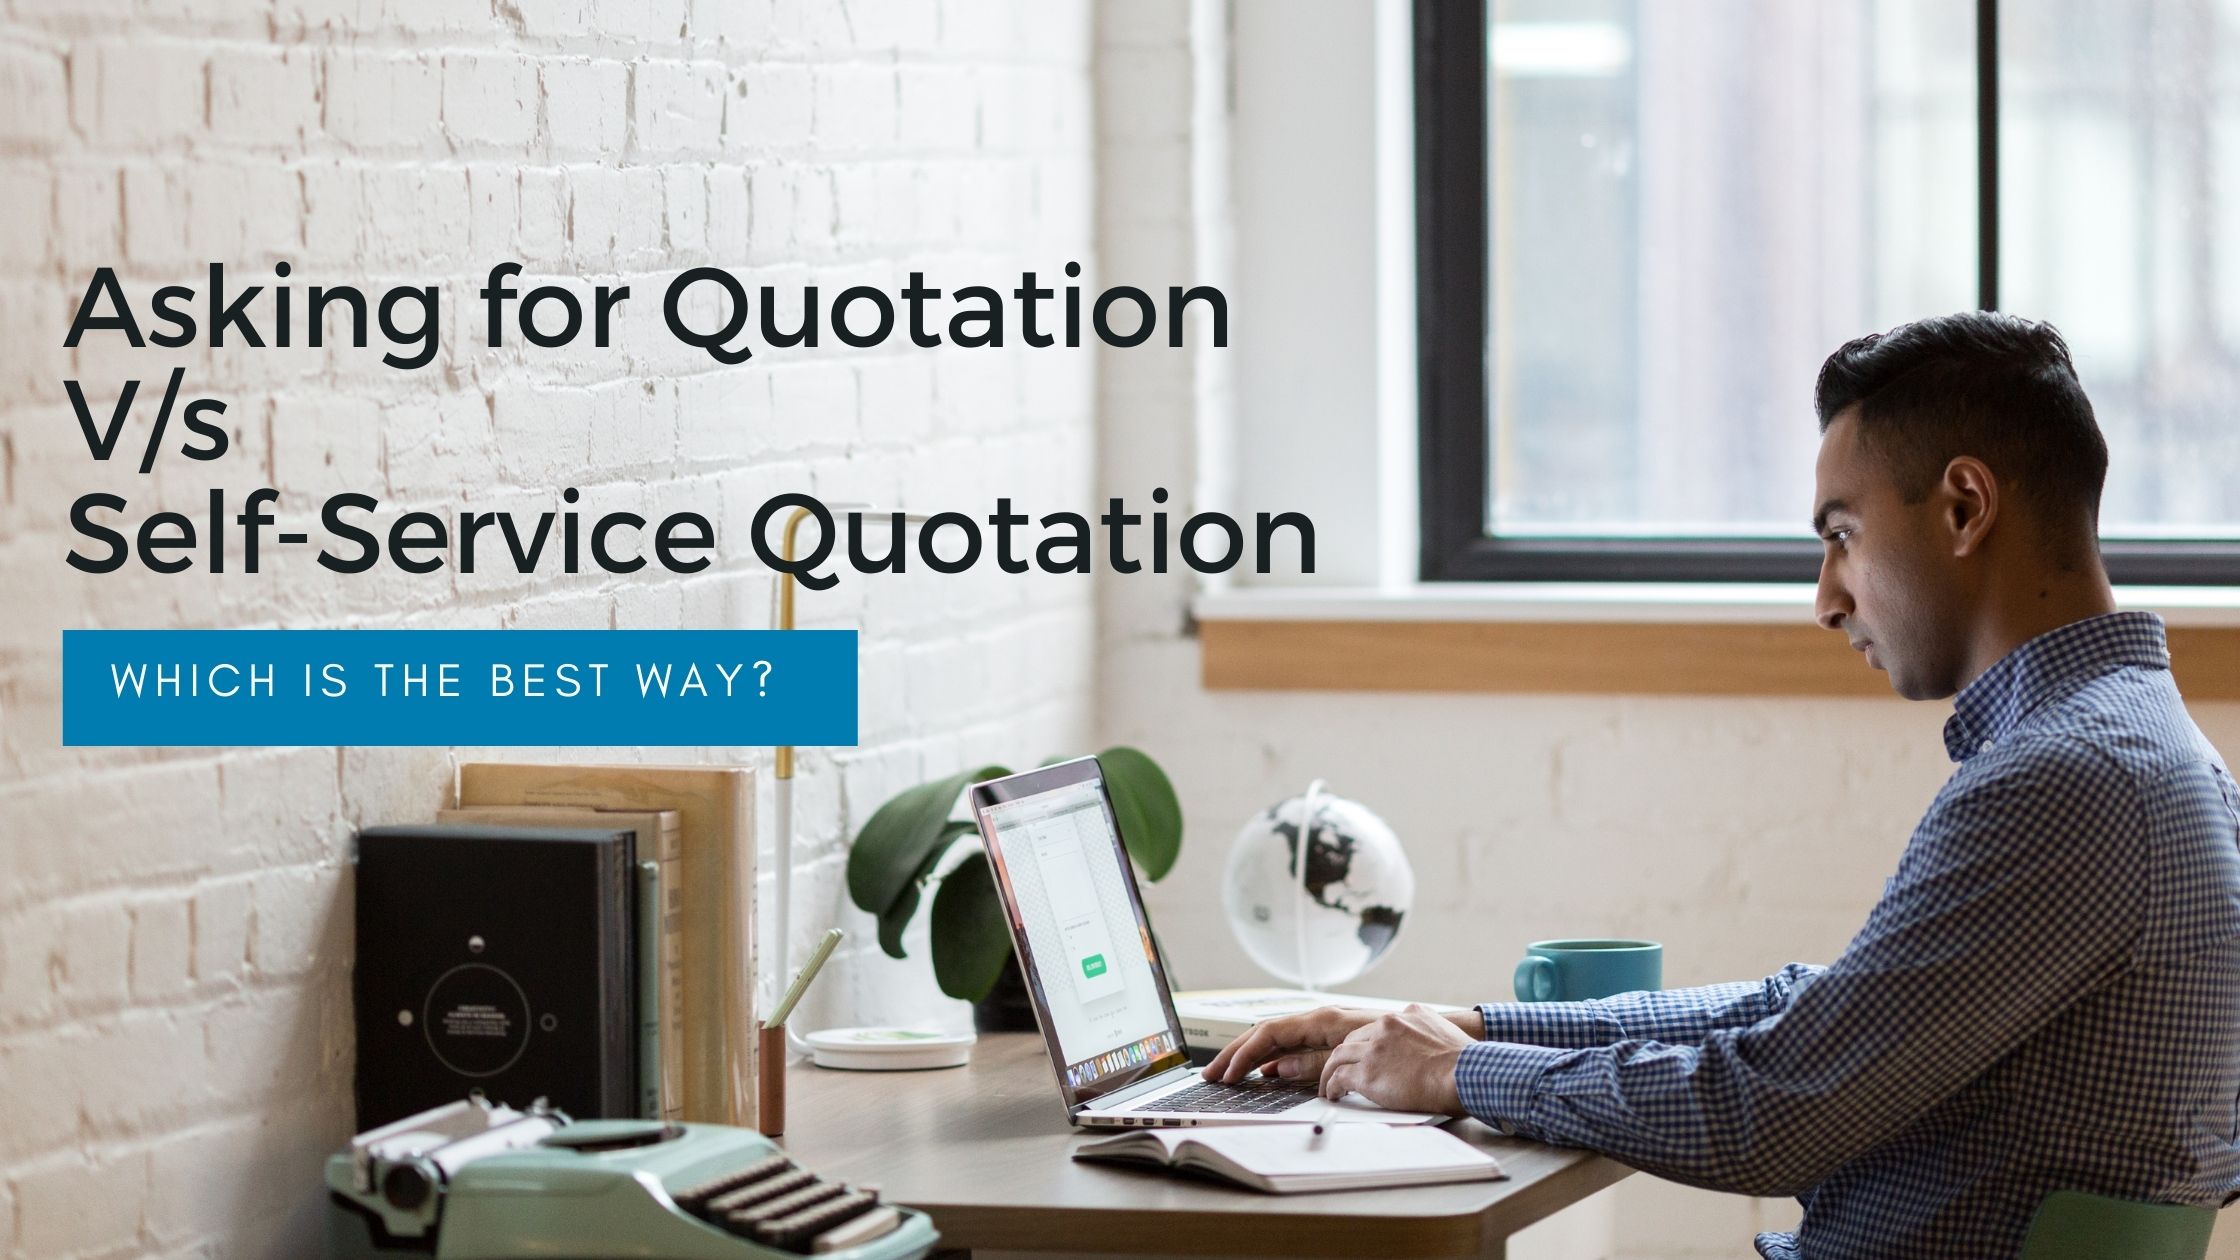 Asking for Quotation V/s Self-Service Quotation